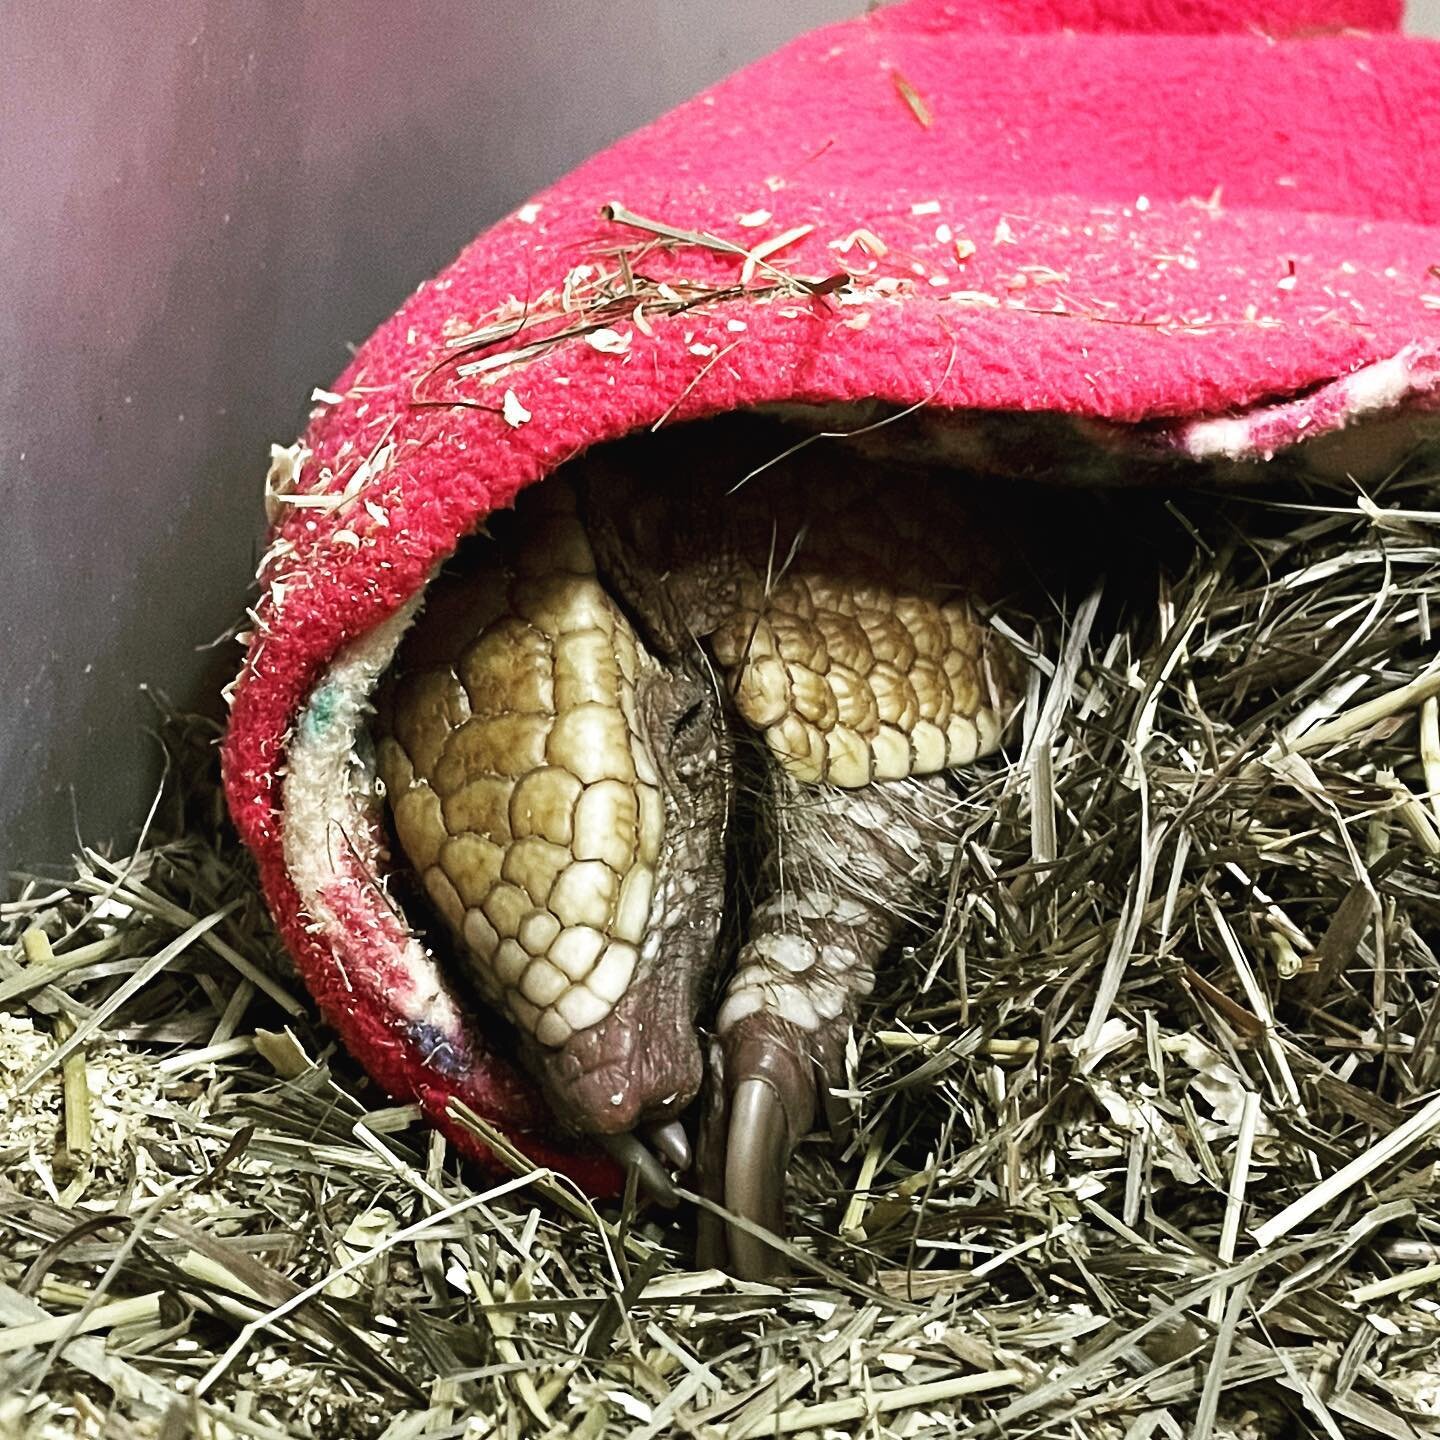 When you are up all night building the perfect nest, it&rsquo;s time to sleep!  Armadillos like Bisquit, our 3 banded armadillo, like to burrow in blankets, hay and grasses. He received a new fleece pouch yesterday. So he compiled all of his hay and 